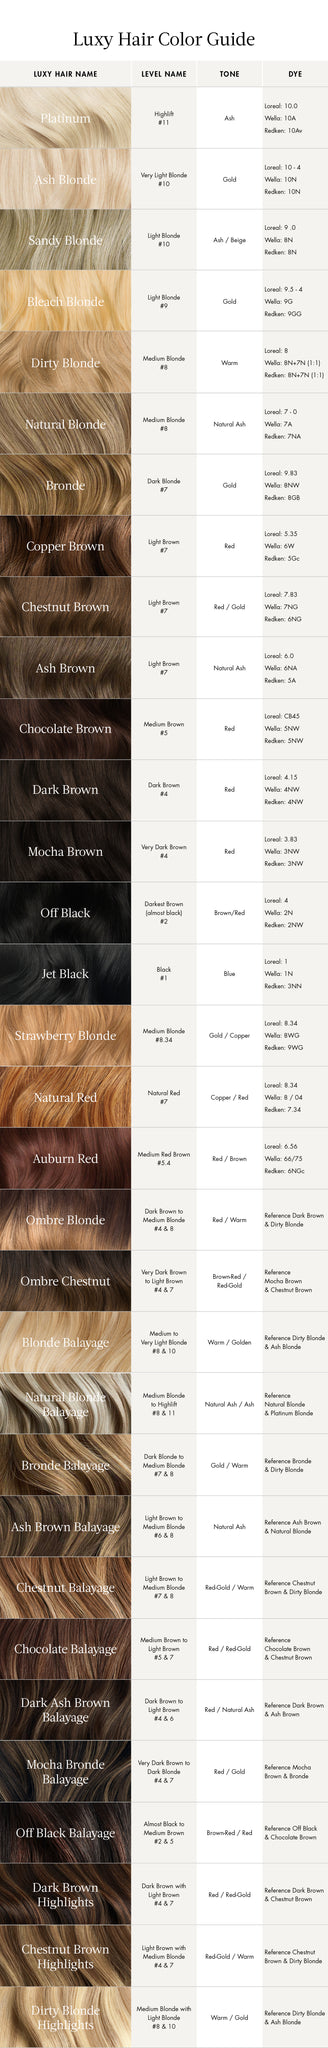 Luxy Hair Color Guide How Do I Choose The Right Color Of Hair Extensi